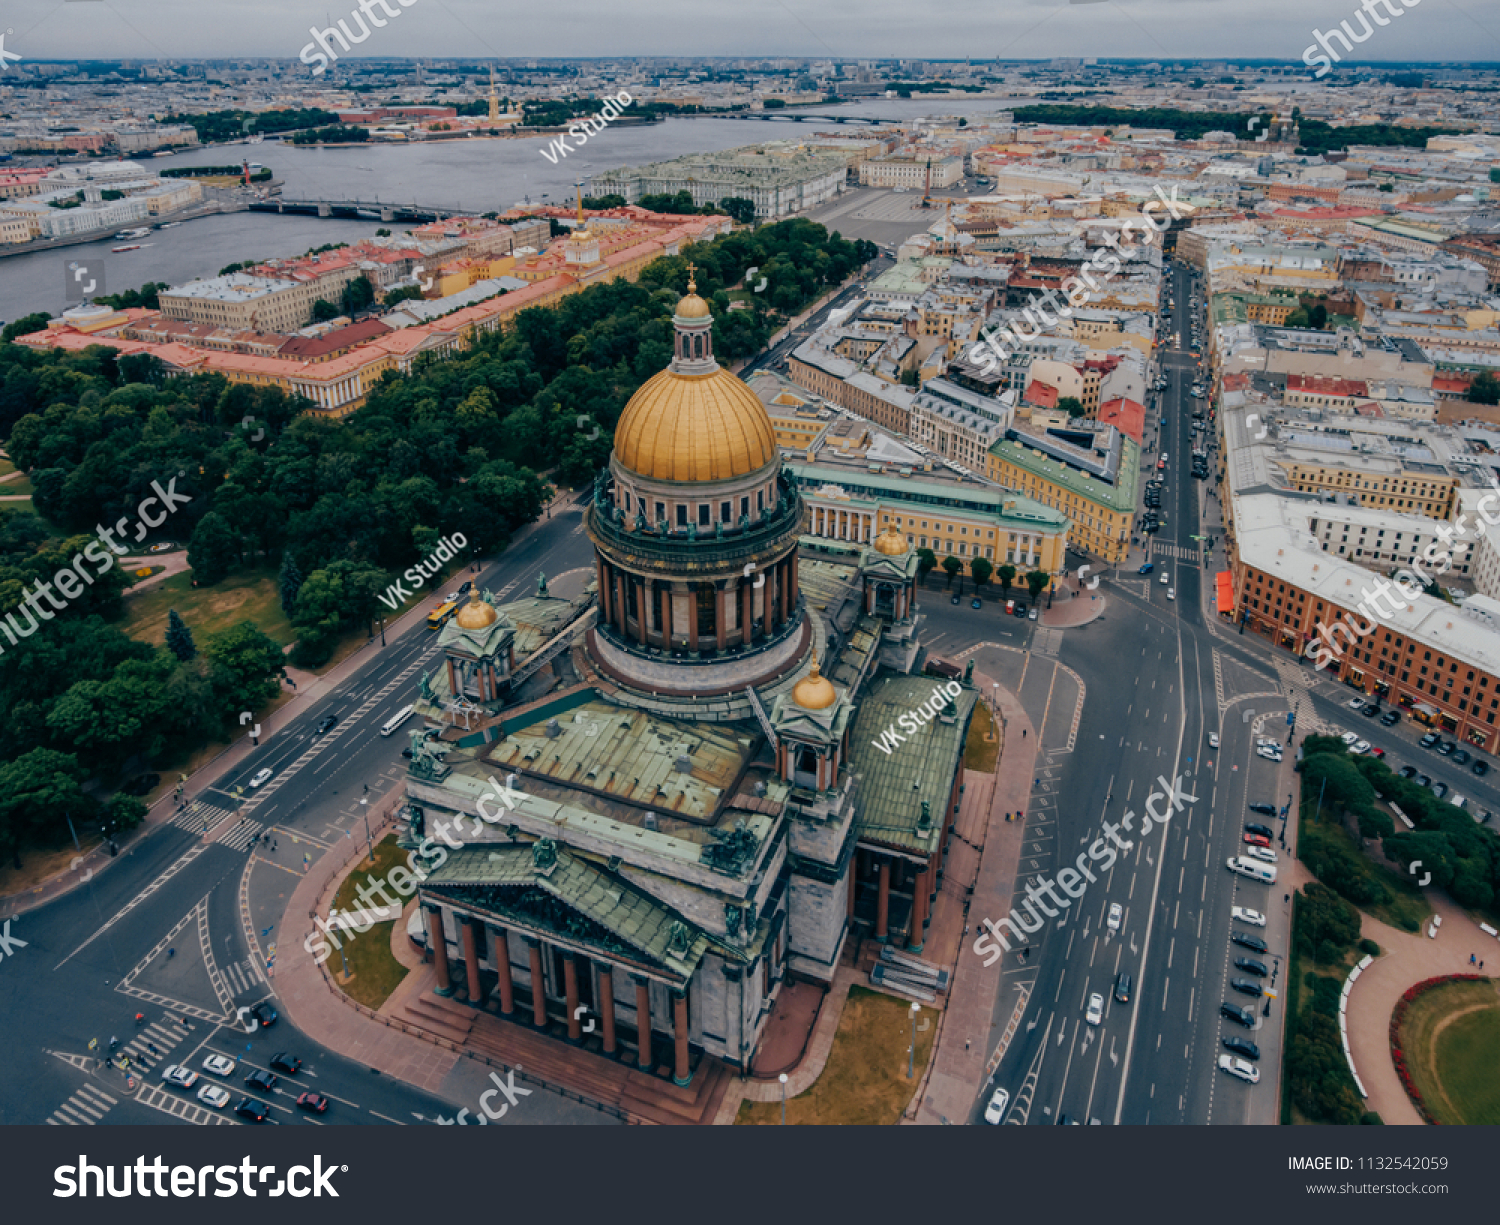 Famous Cathedral in St Petersburg on Isaac Square. Aerial view. Sights for tourists. Russian monuments and places of interest #1132542059